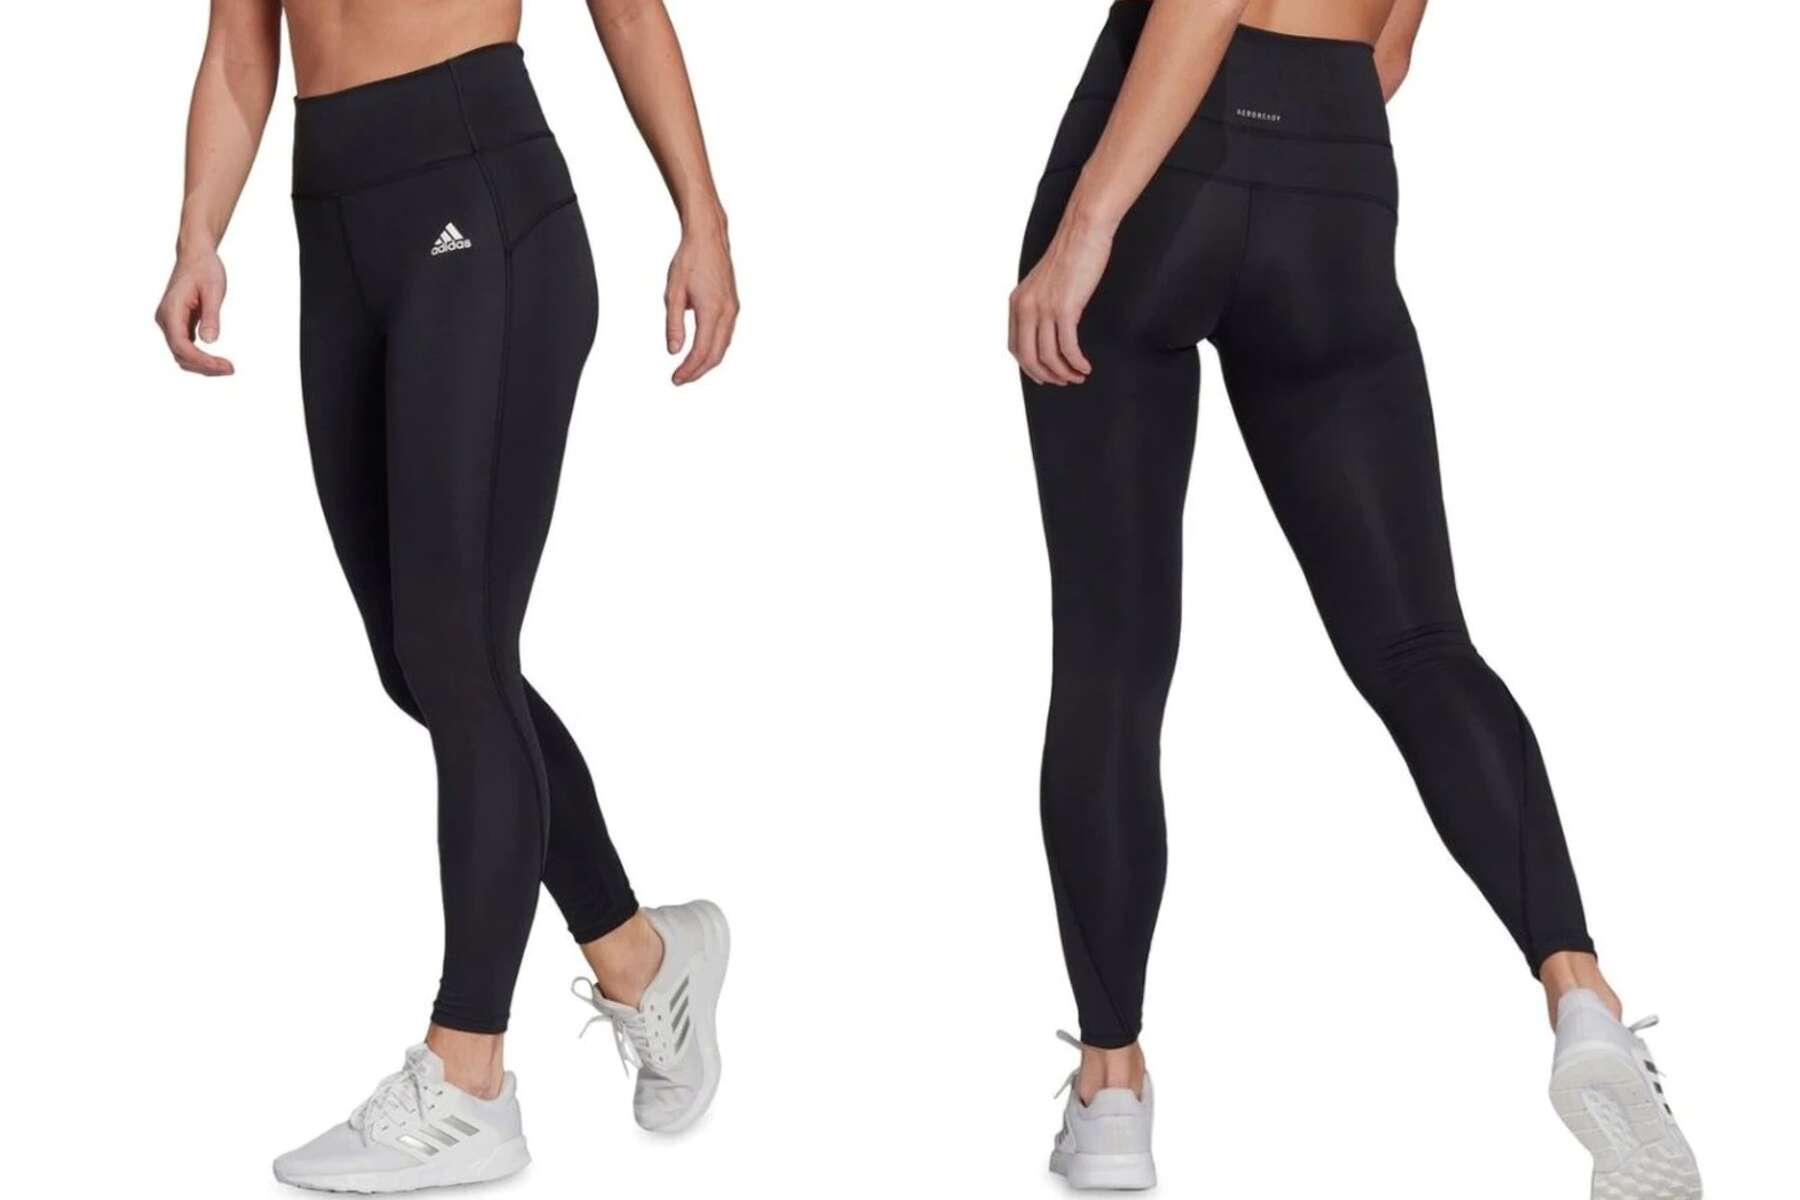 Adidas FeelBrilliant tights review: only gym pants you'll ever need